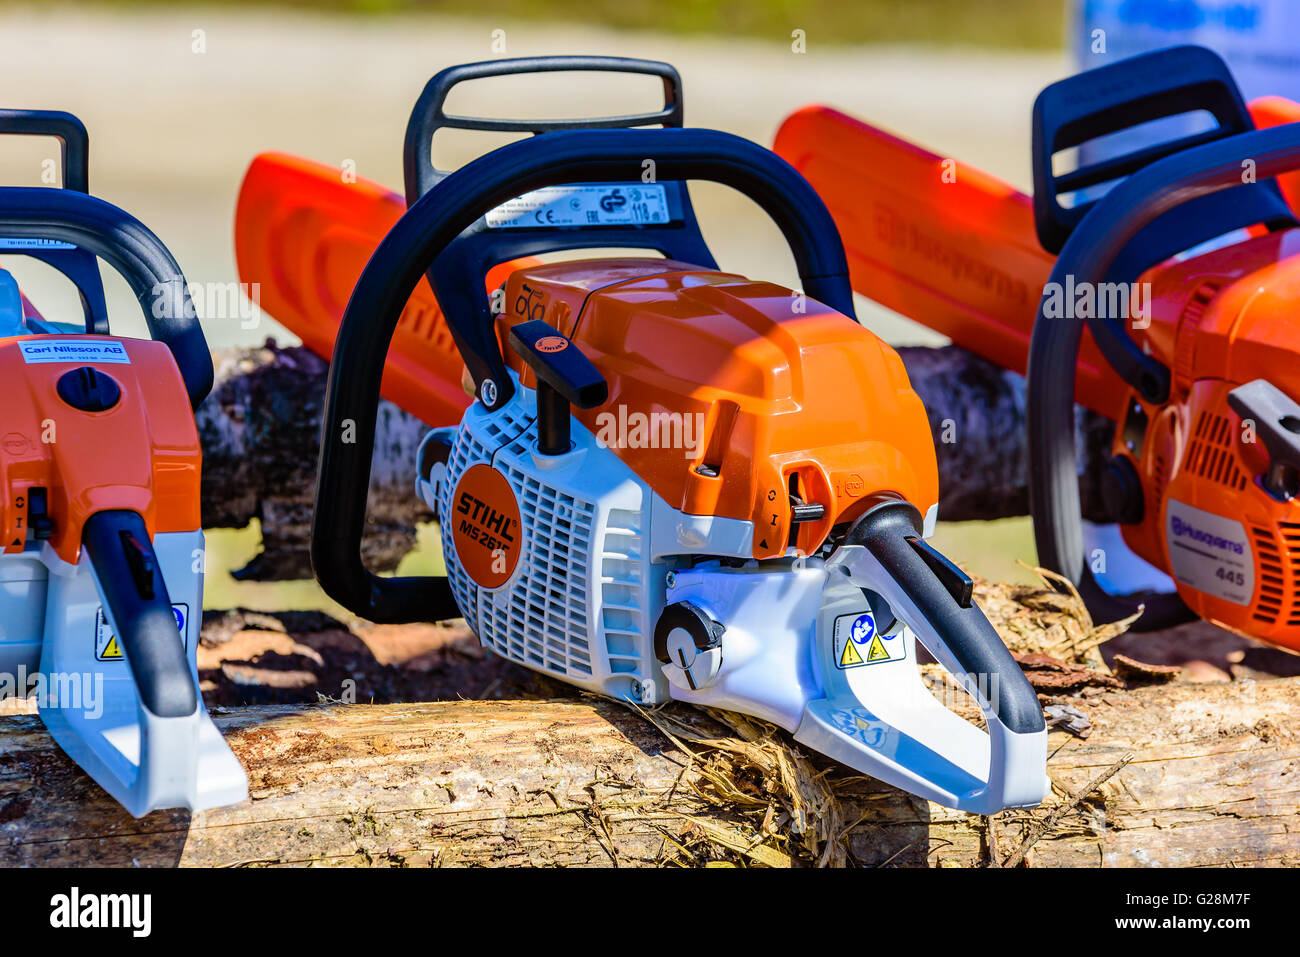 Emmaboda, Sweden - May 13, 2016: Forest and tractor (Skog och traktor) fair. Stihl MS 261c chainsaw on wooden logs Stock Photo